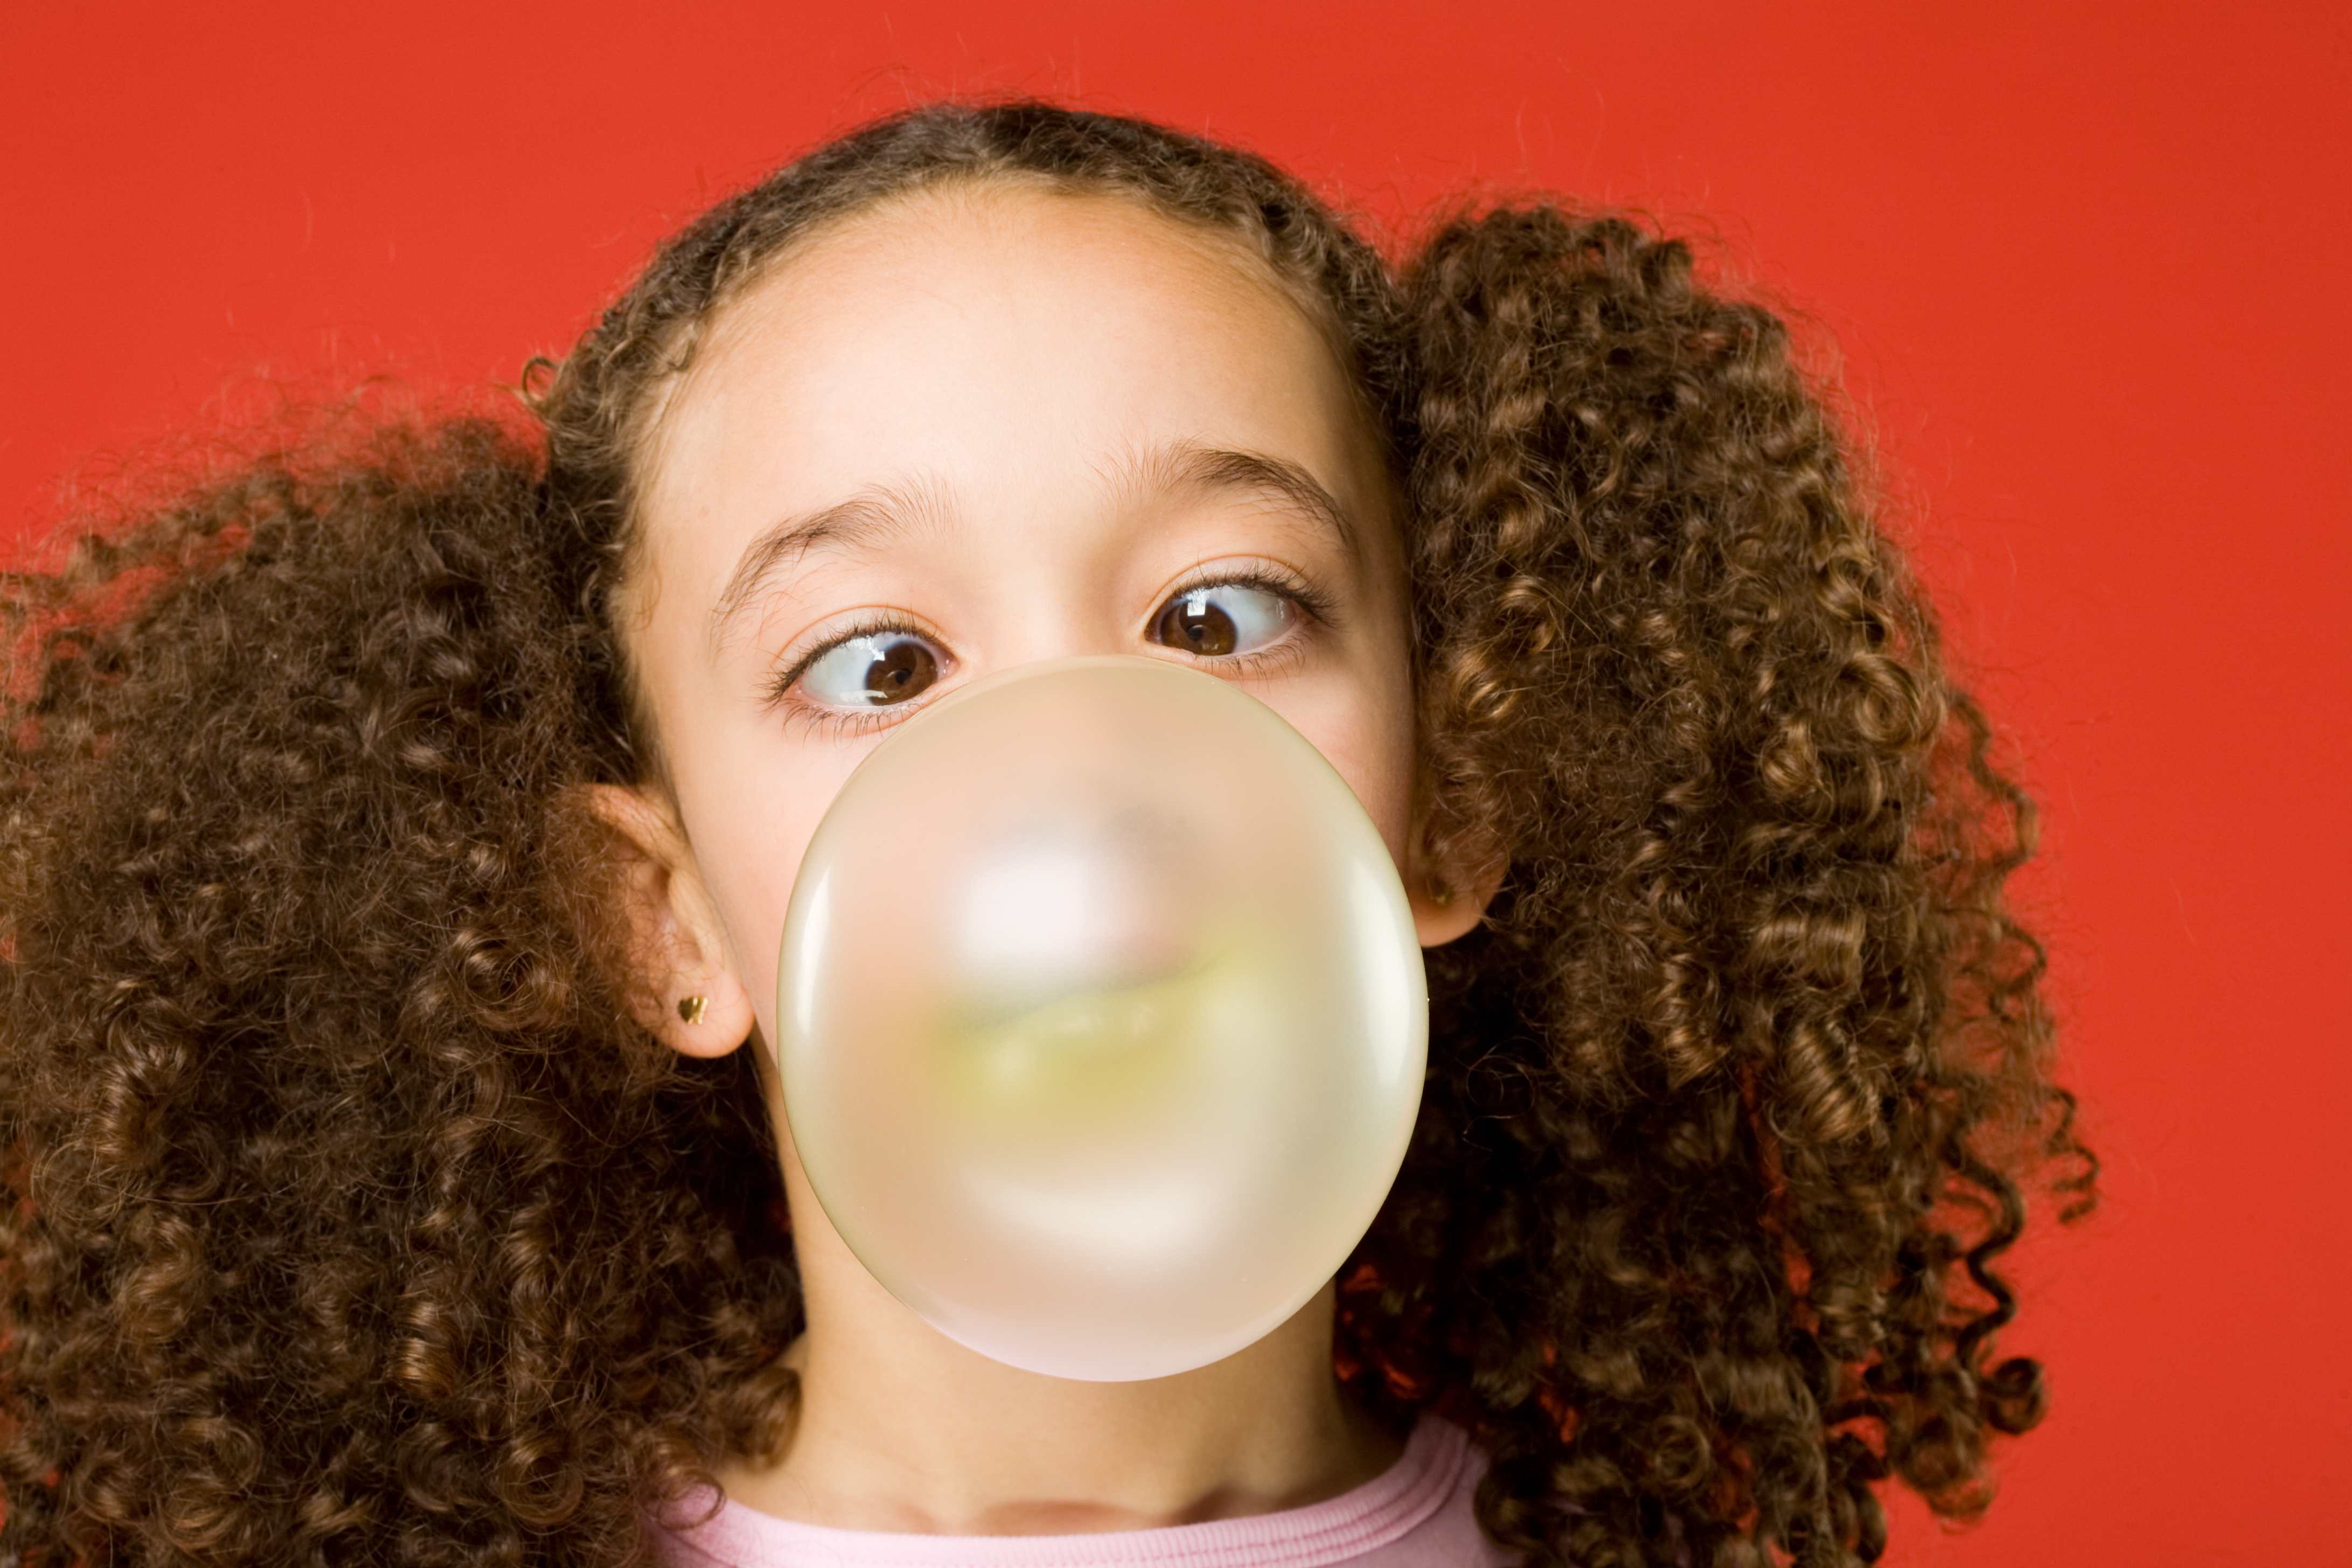 Episode 13: What's the Difference Between Bubble Gum and Chewing Gum? –  Scout Life magazine